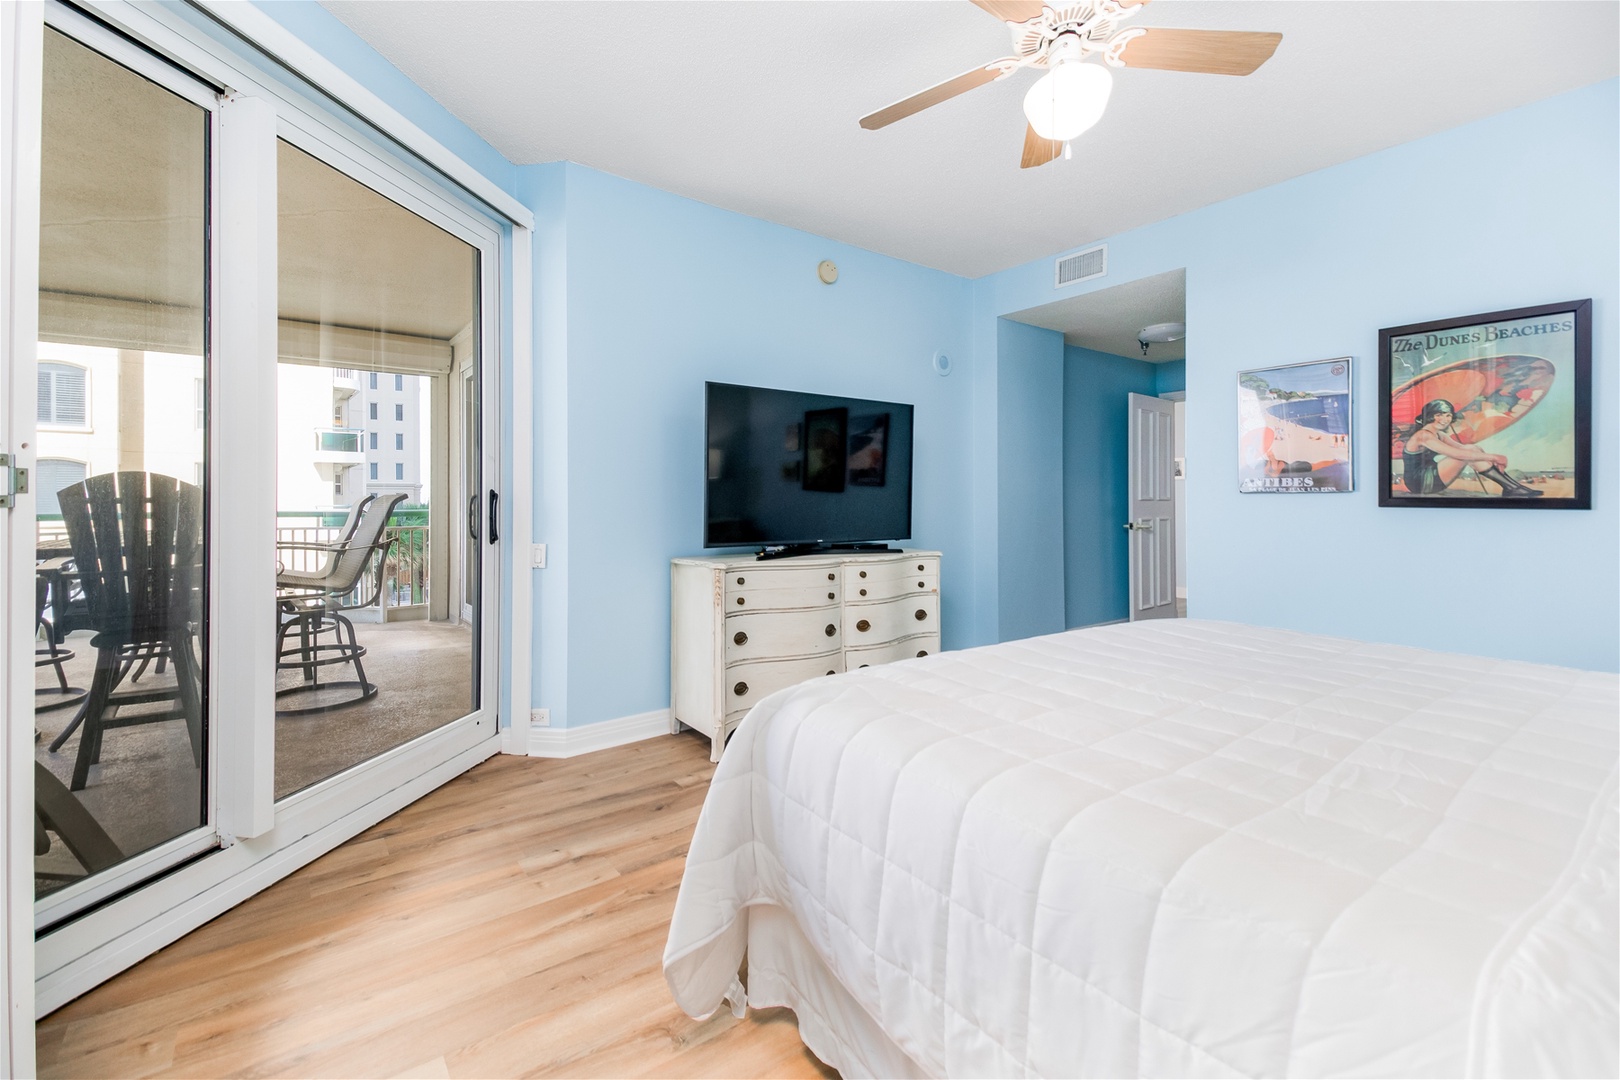 Beach Colony Tower 3D Master Bedroom With Deck Access